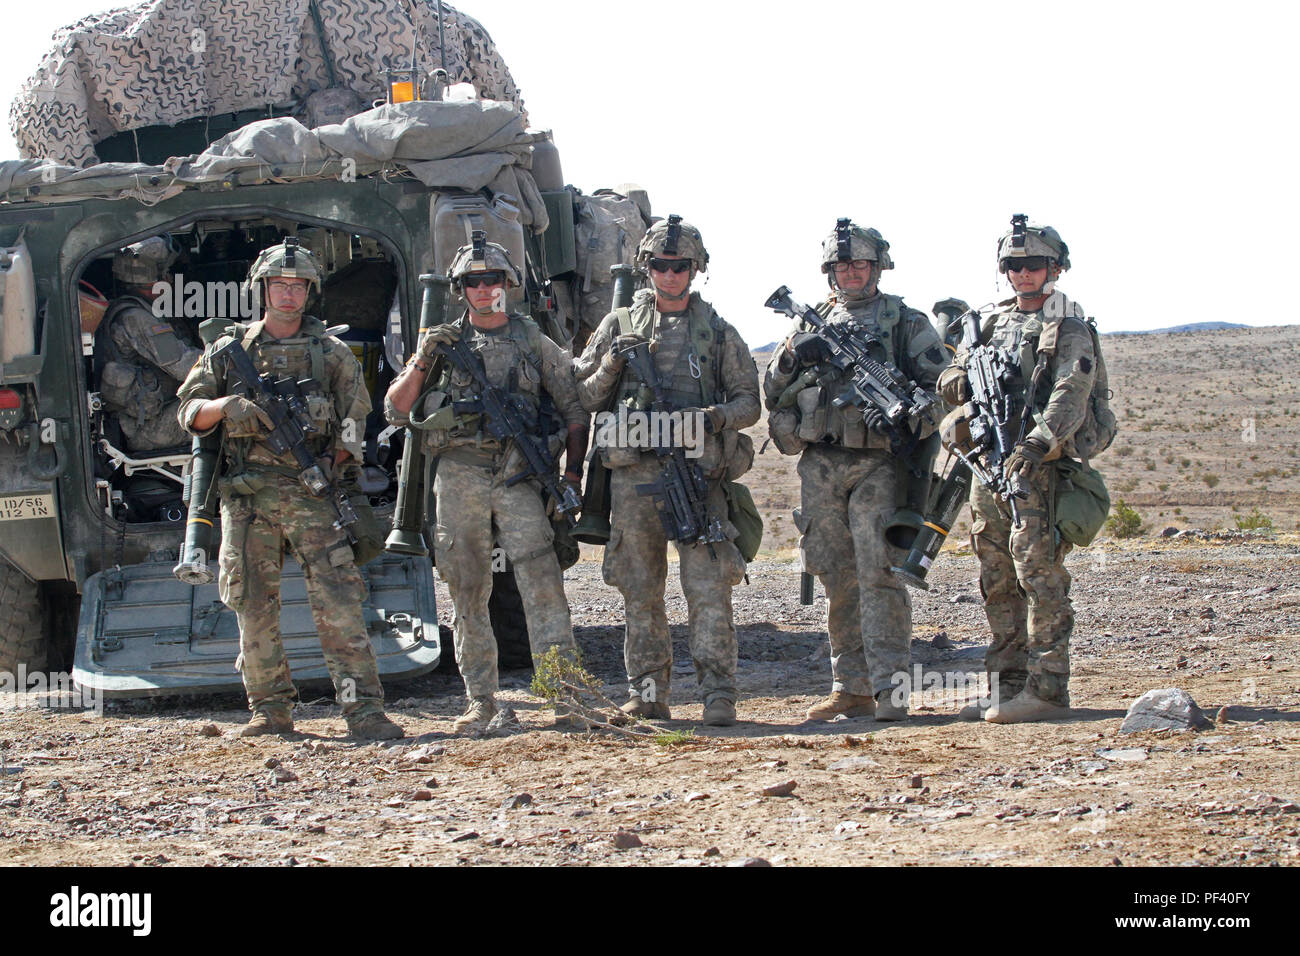 From left to right, Spc. Joshua Decker, Spc. Dylan Leonard, Sgt. Kevin Litz, Spc. Sam Garman, and Spc. William Reed, all infantrymen with Alpha Company, 2nd Battalion, 112th Infantry Regiment, 56th Stryker Brigade Combat Team, 28th Infantry Division, Pennsylvania Army National Guard, stand in front of a Stryker, an eight-wheeled armored fighting vehicle, shortly after concluding AT40 live-fire training at the National Training Center, Fort Irwin, California, Aug. 15. (U.S. Army National Guard photo by Sgt. Shane Smith/released) Stock Photo